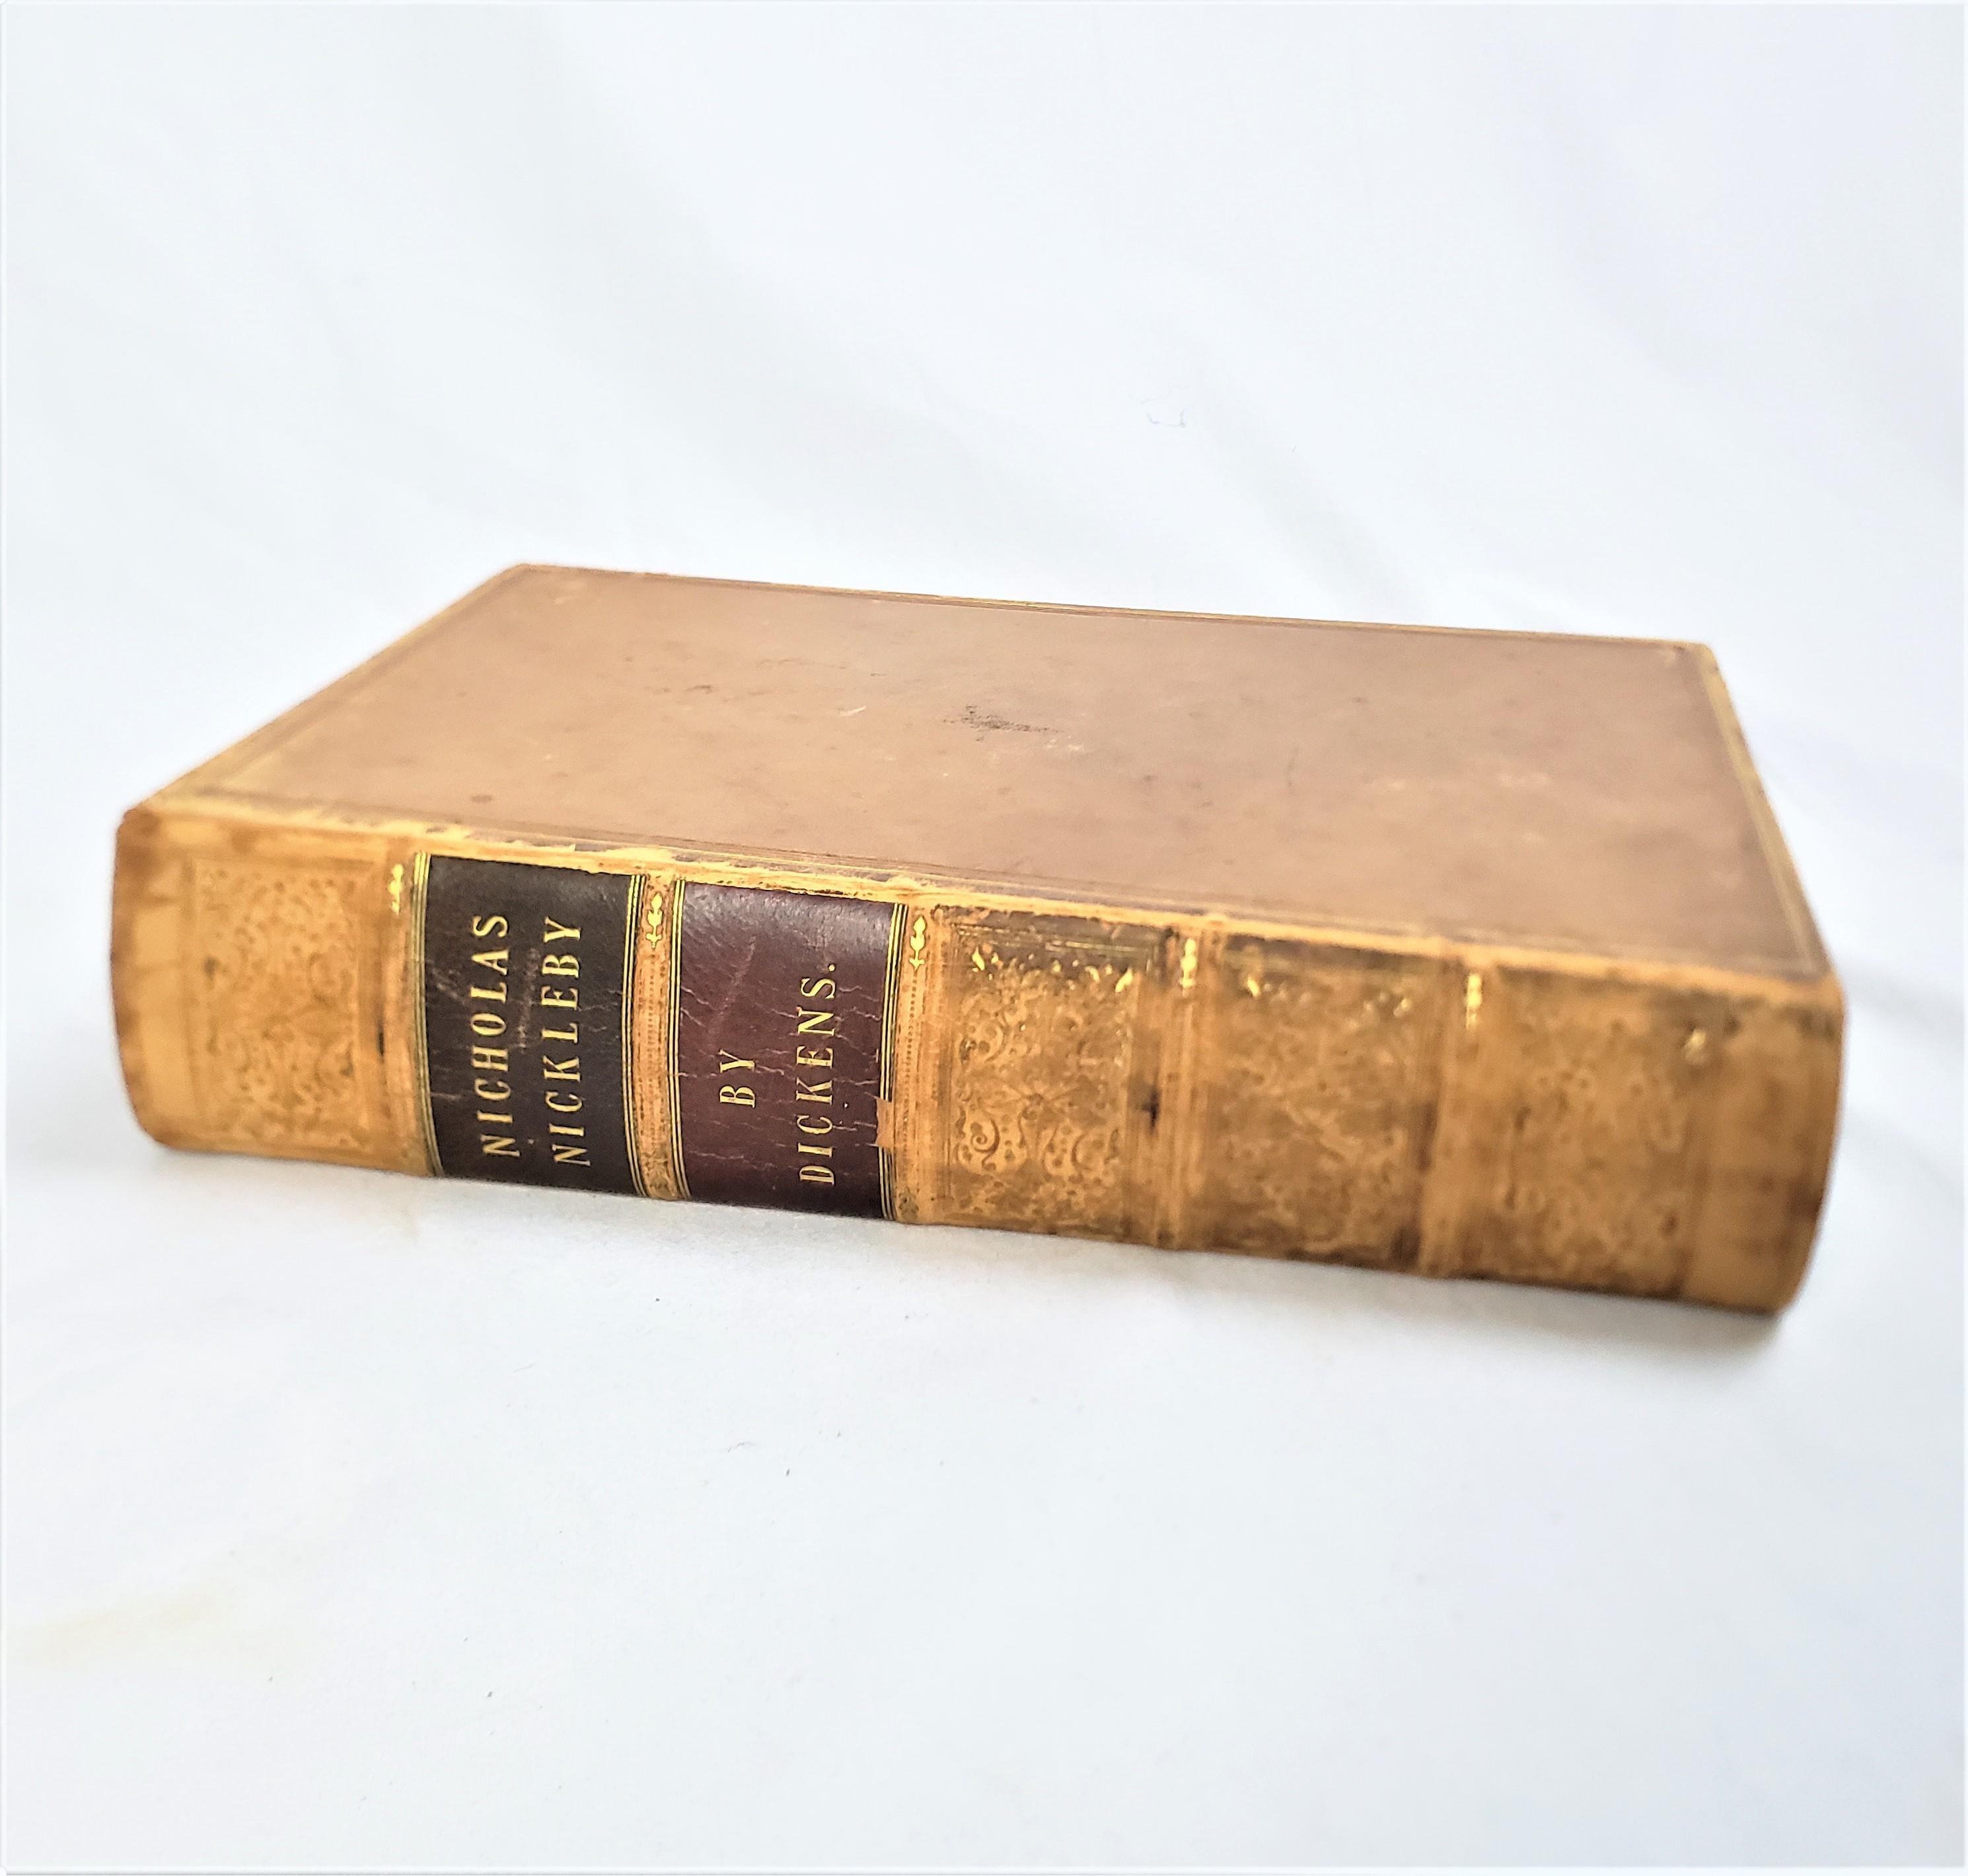 This antique 1st Edition book titled Nicholas Nickeby was authored by Charles Dickens and published by Chapman and Hall of England in 1839 in the period Victorian style with etchings by Hablot  Knight Browne 